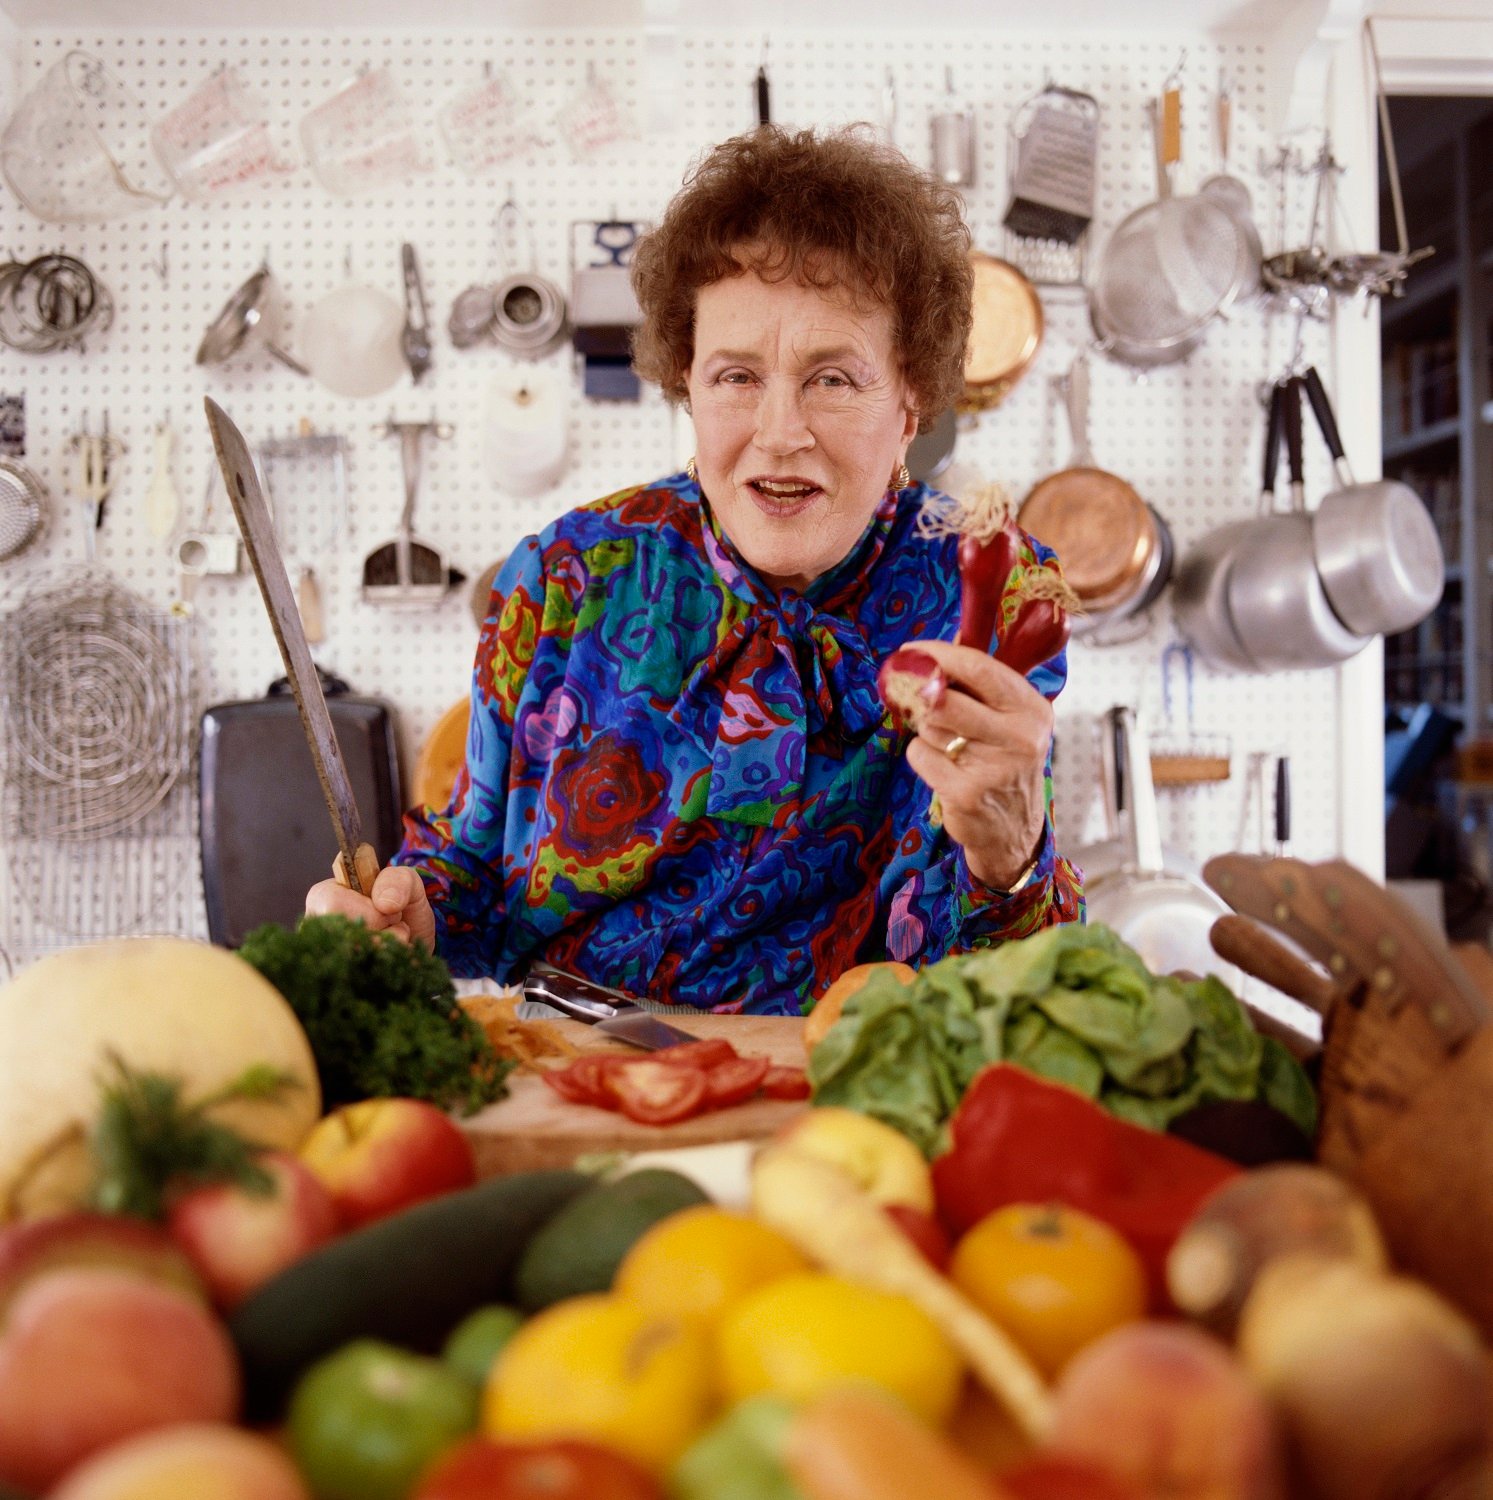 Julia Child photographed posing in her kitchen chopping vegetables